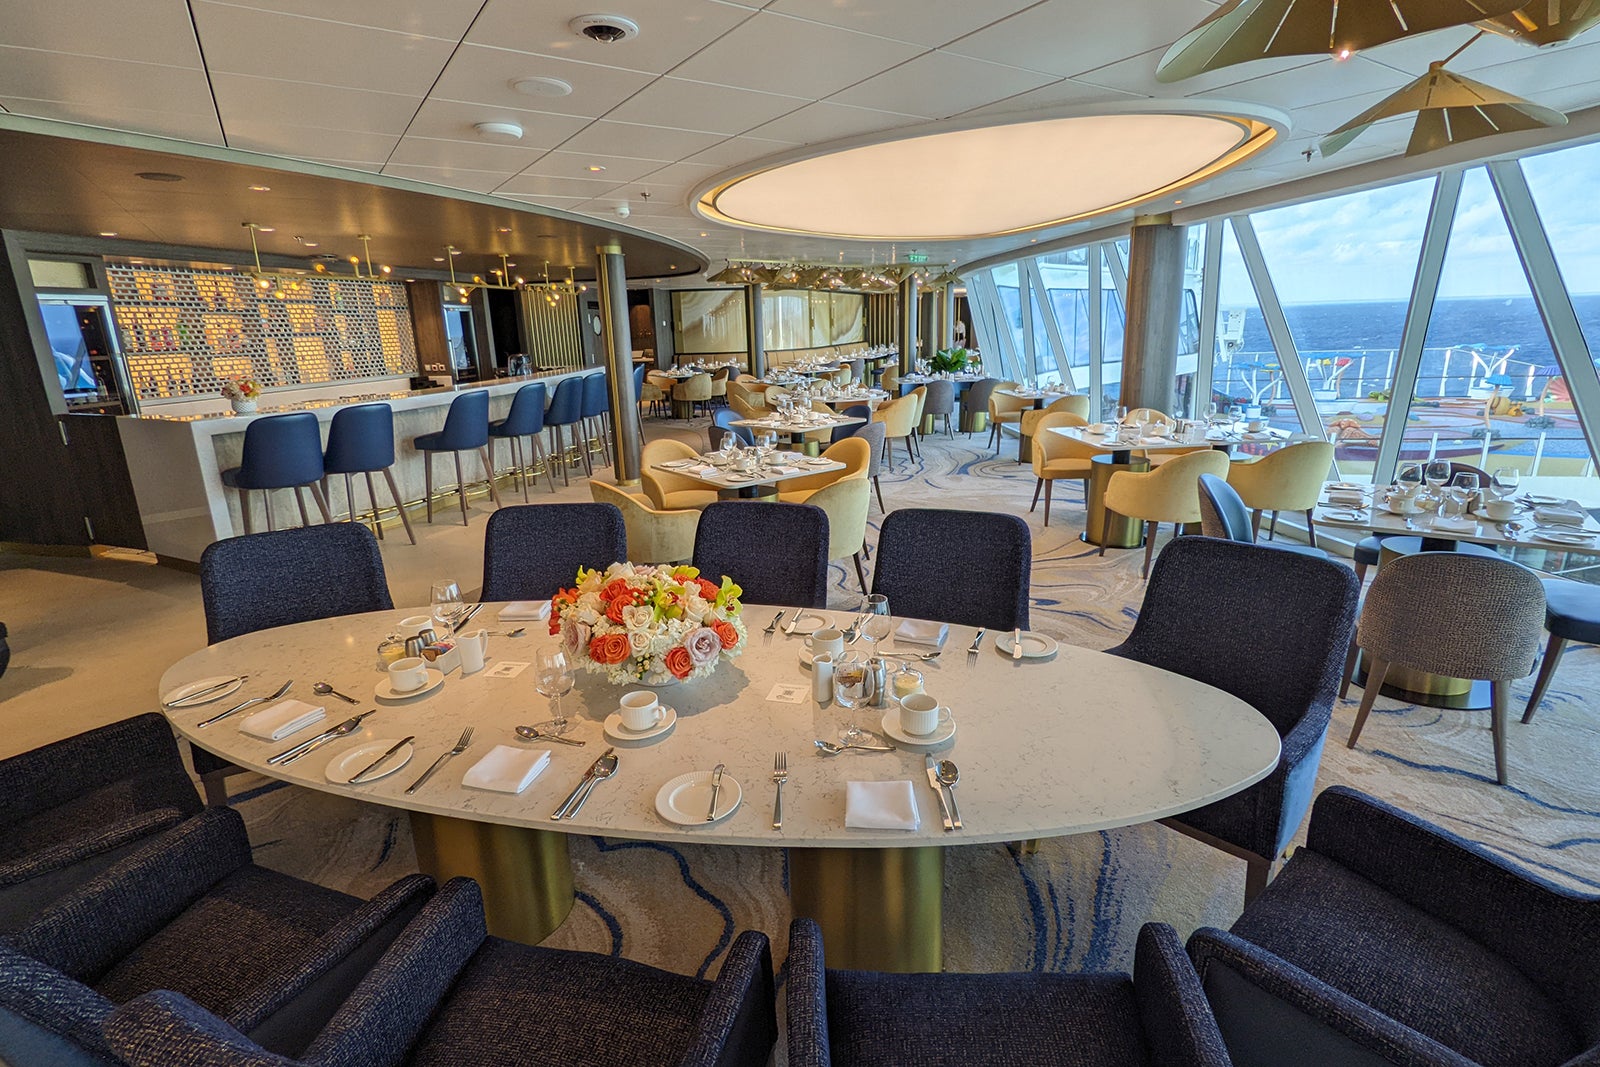 Bar and restaurant on cruise ship with large windows